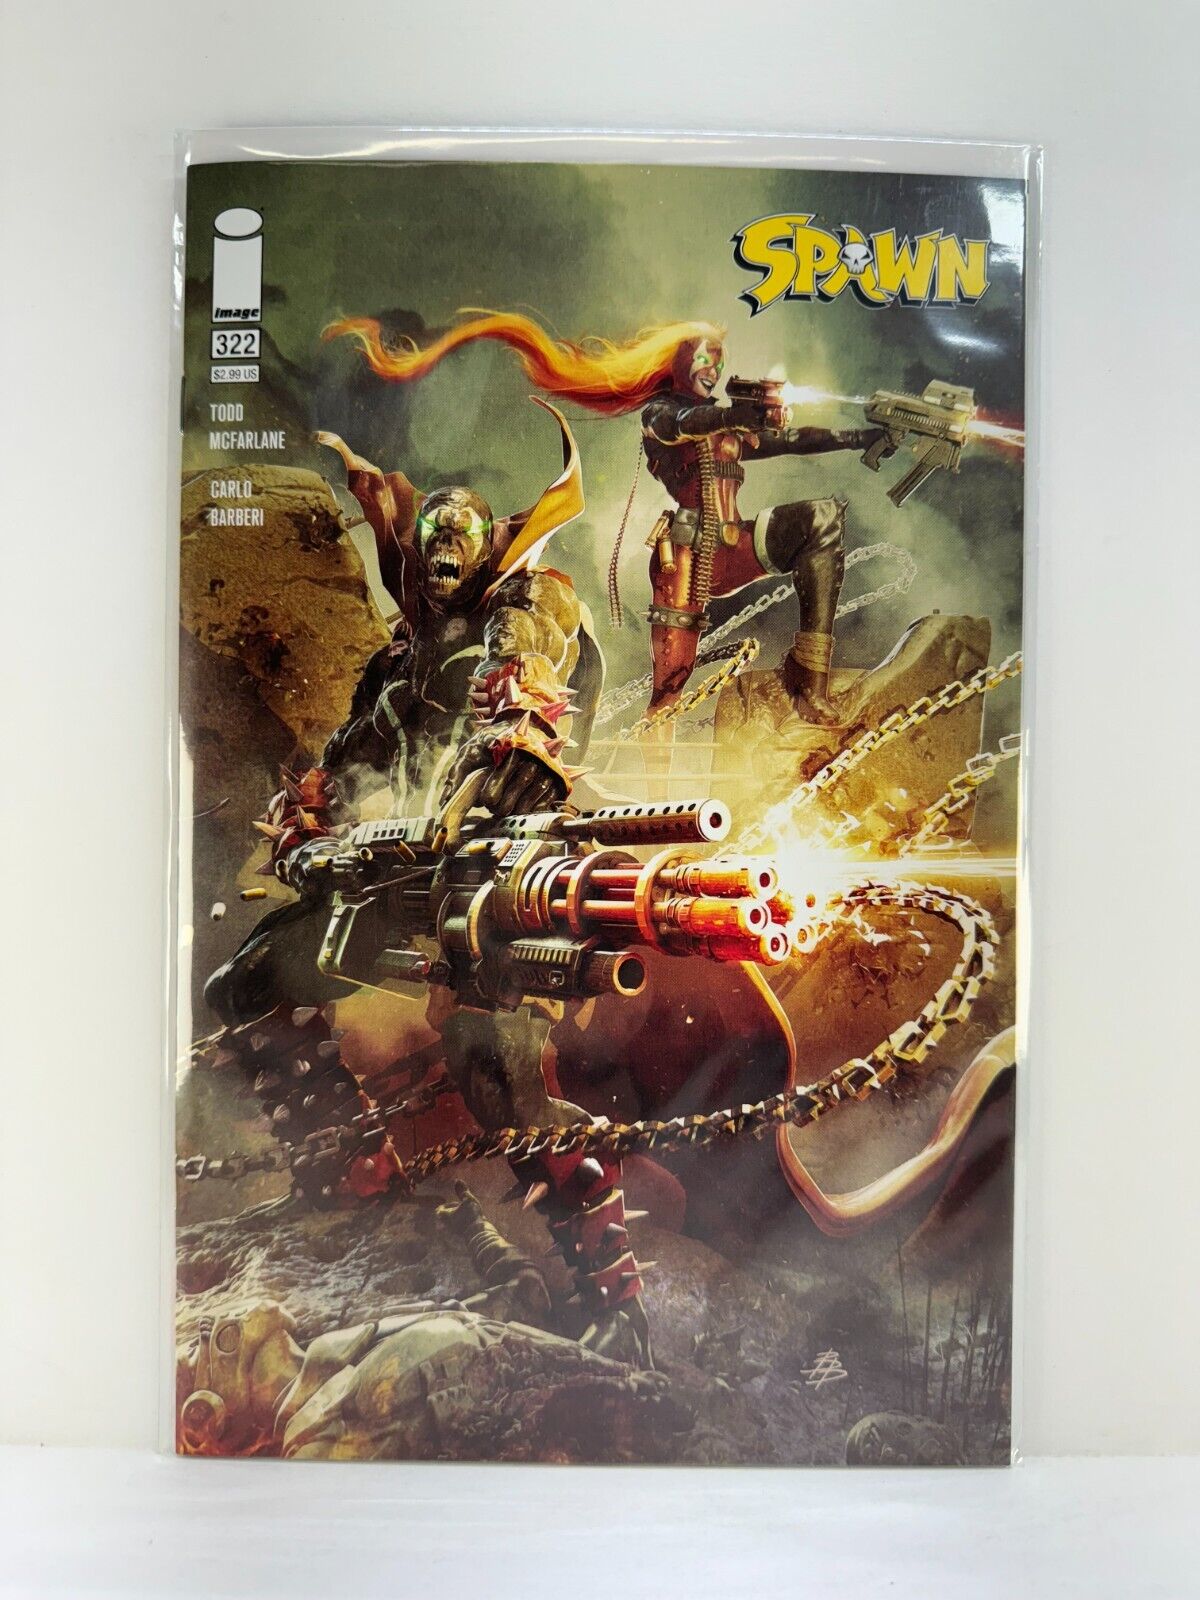 SPAWN Comic Books: You Pick. King Spawn, Scorched, Gunslinger. Many to Choose